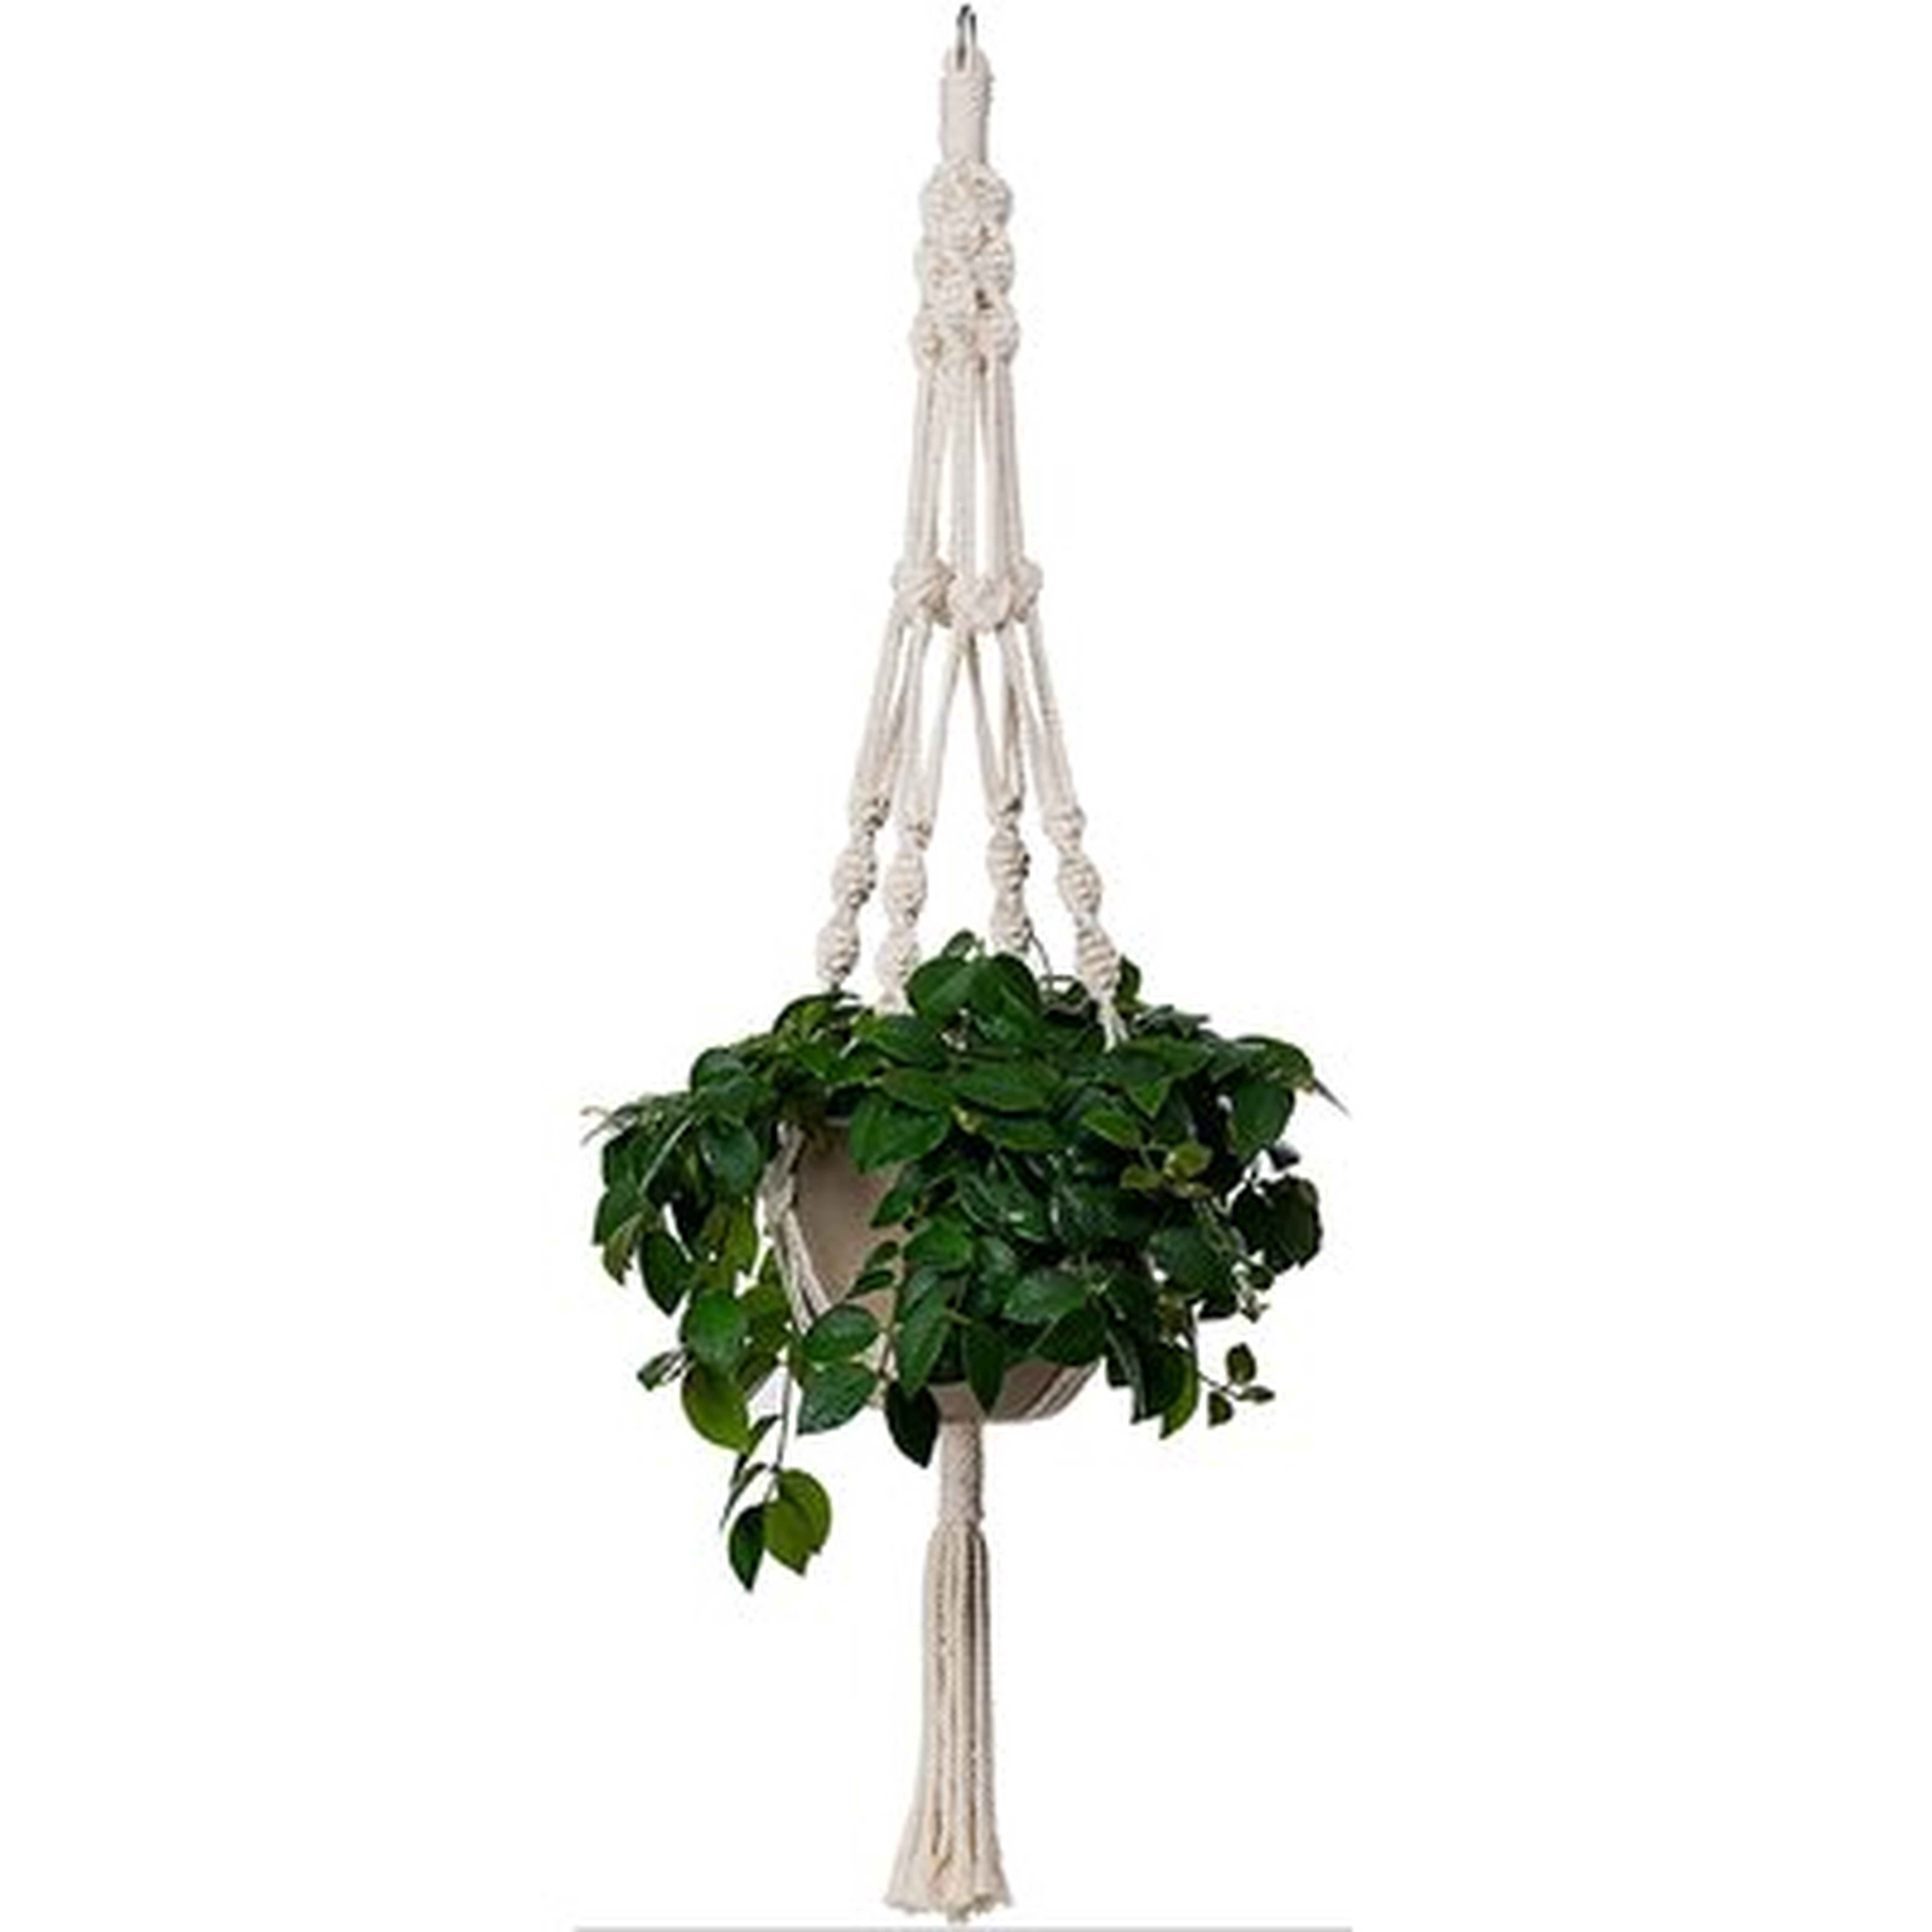 Macrame Plant Hanger Bulky 46In Handmade Indoor Outdoor Decoration Hanging Planter, Cotton 1/4In Thick Sturdy Rope Basket For Round - Wayfair